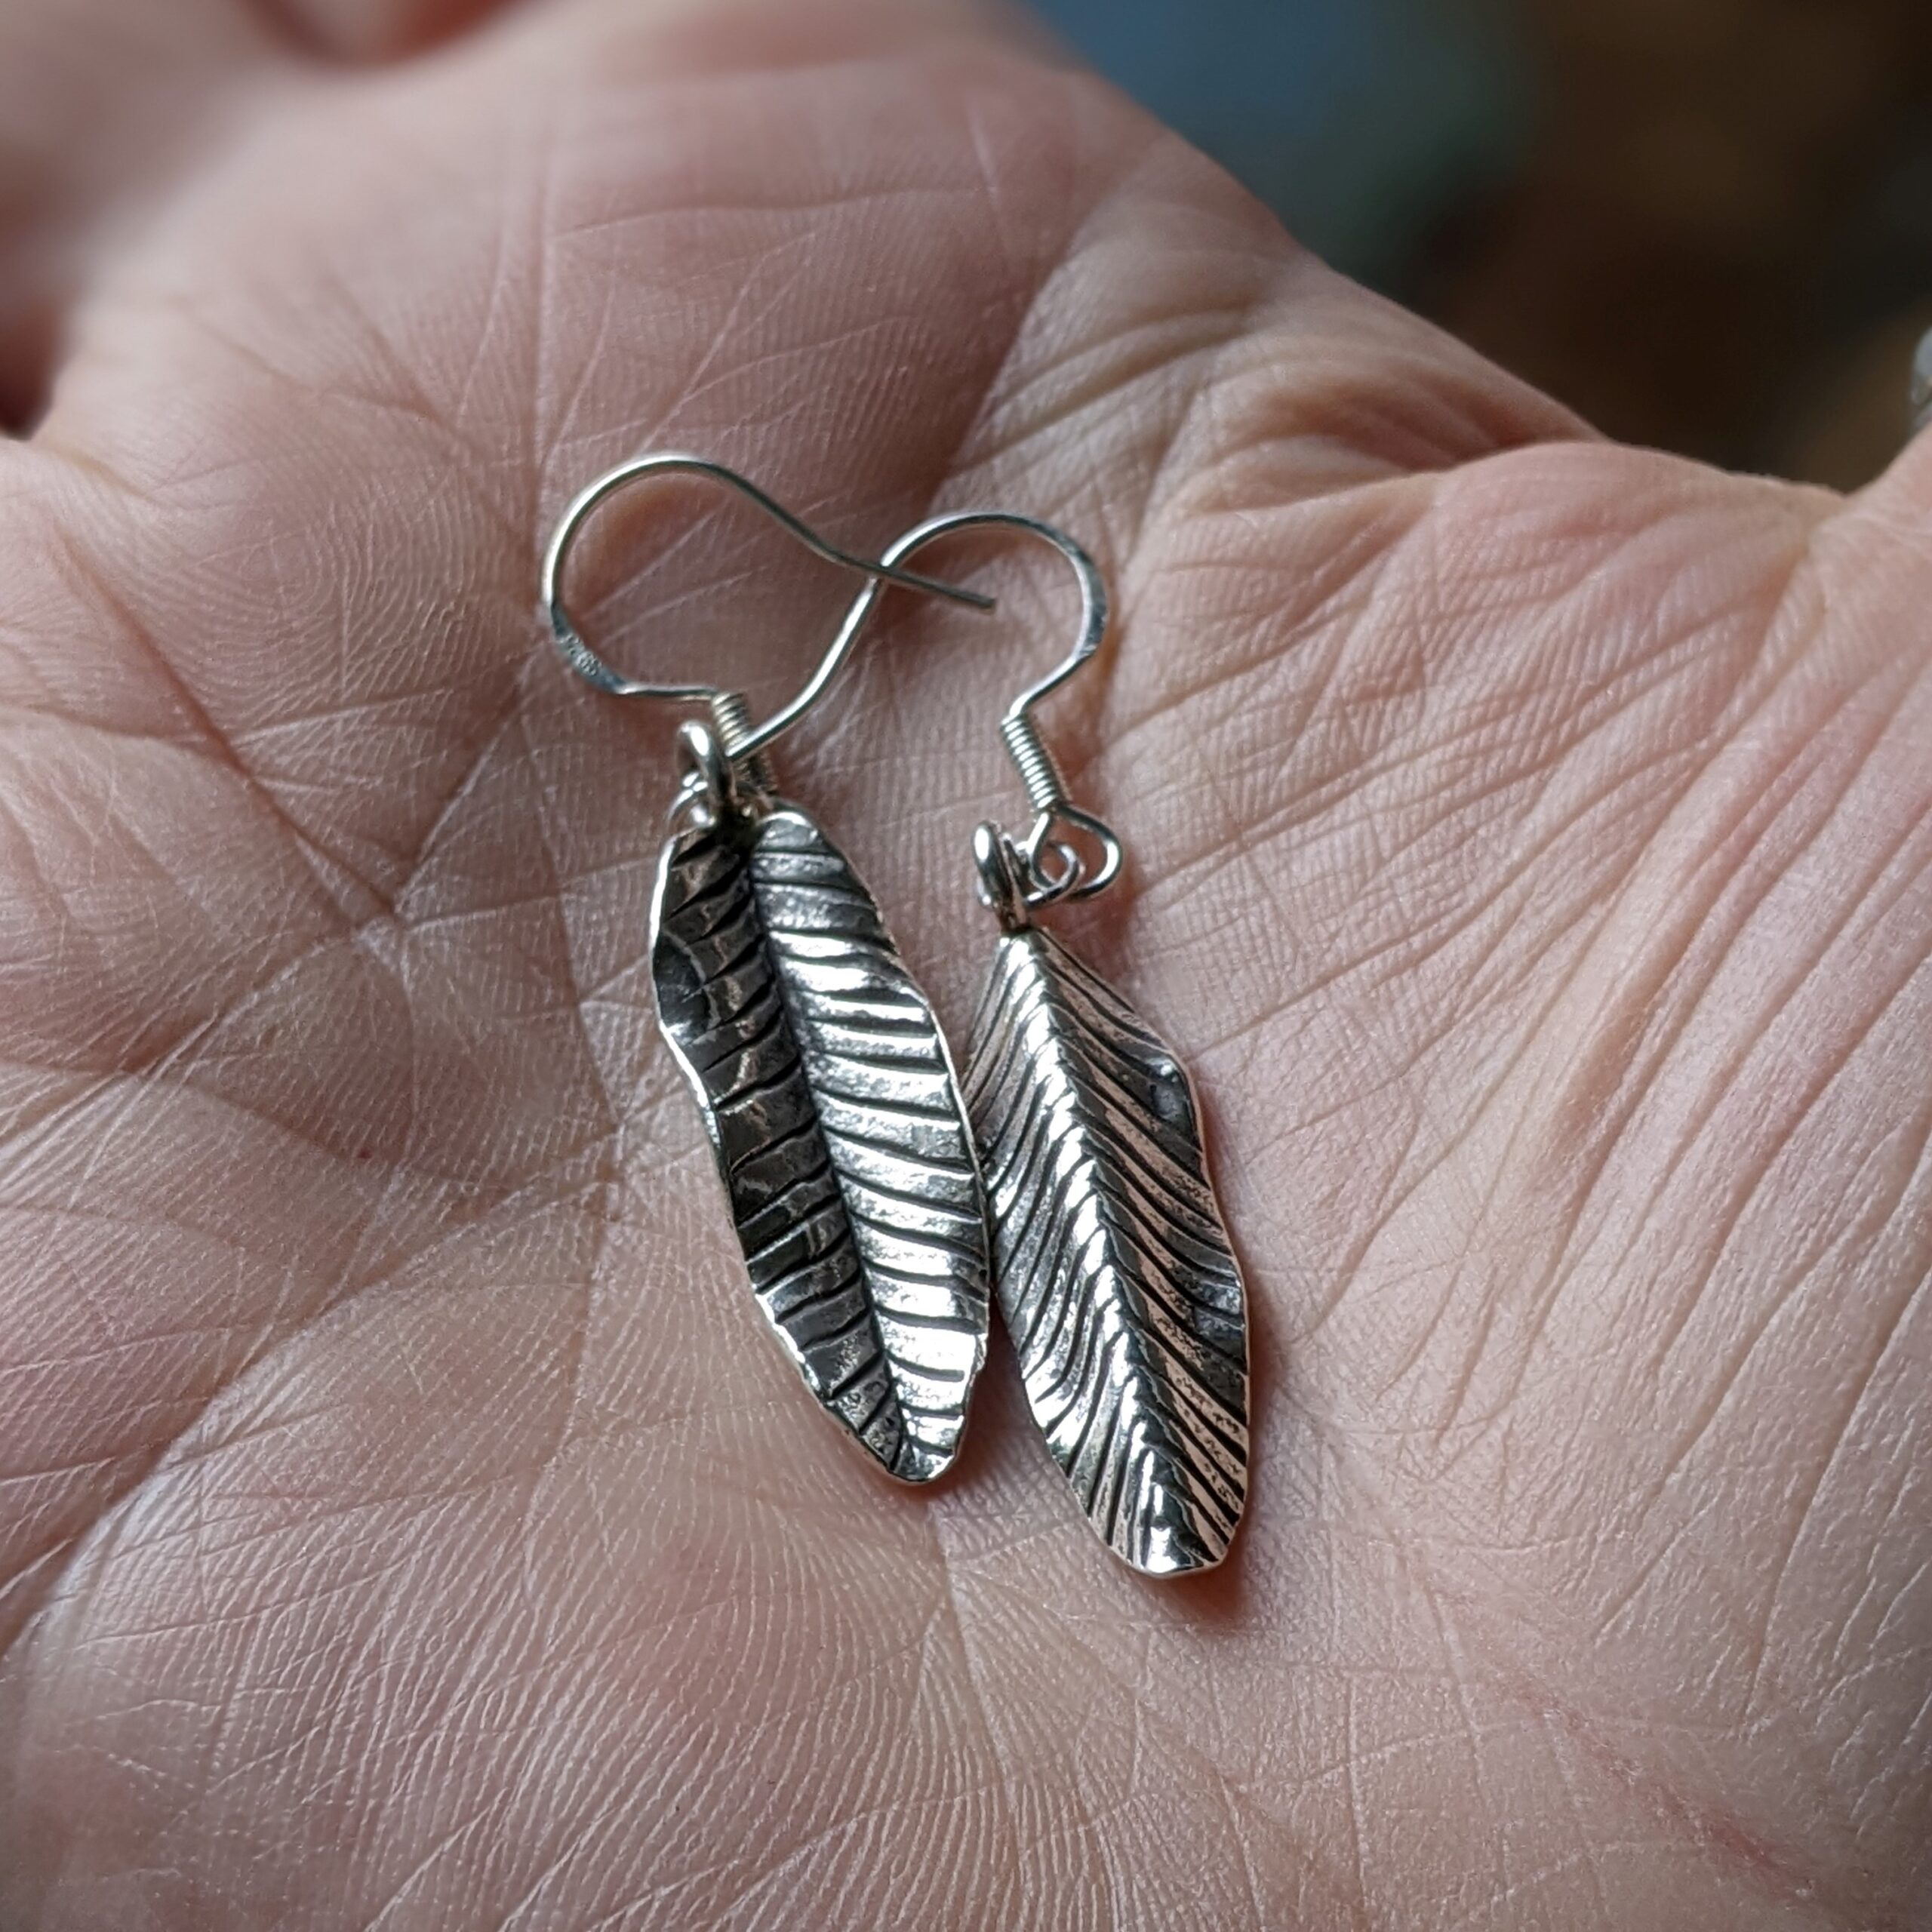 Bald Eagle Copper Feather Earrings, Colorful Art Copper Feather Earrings